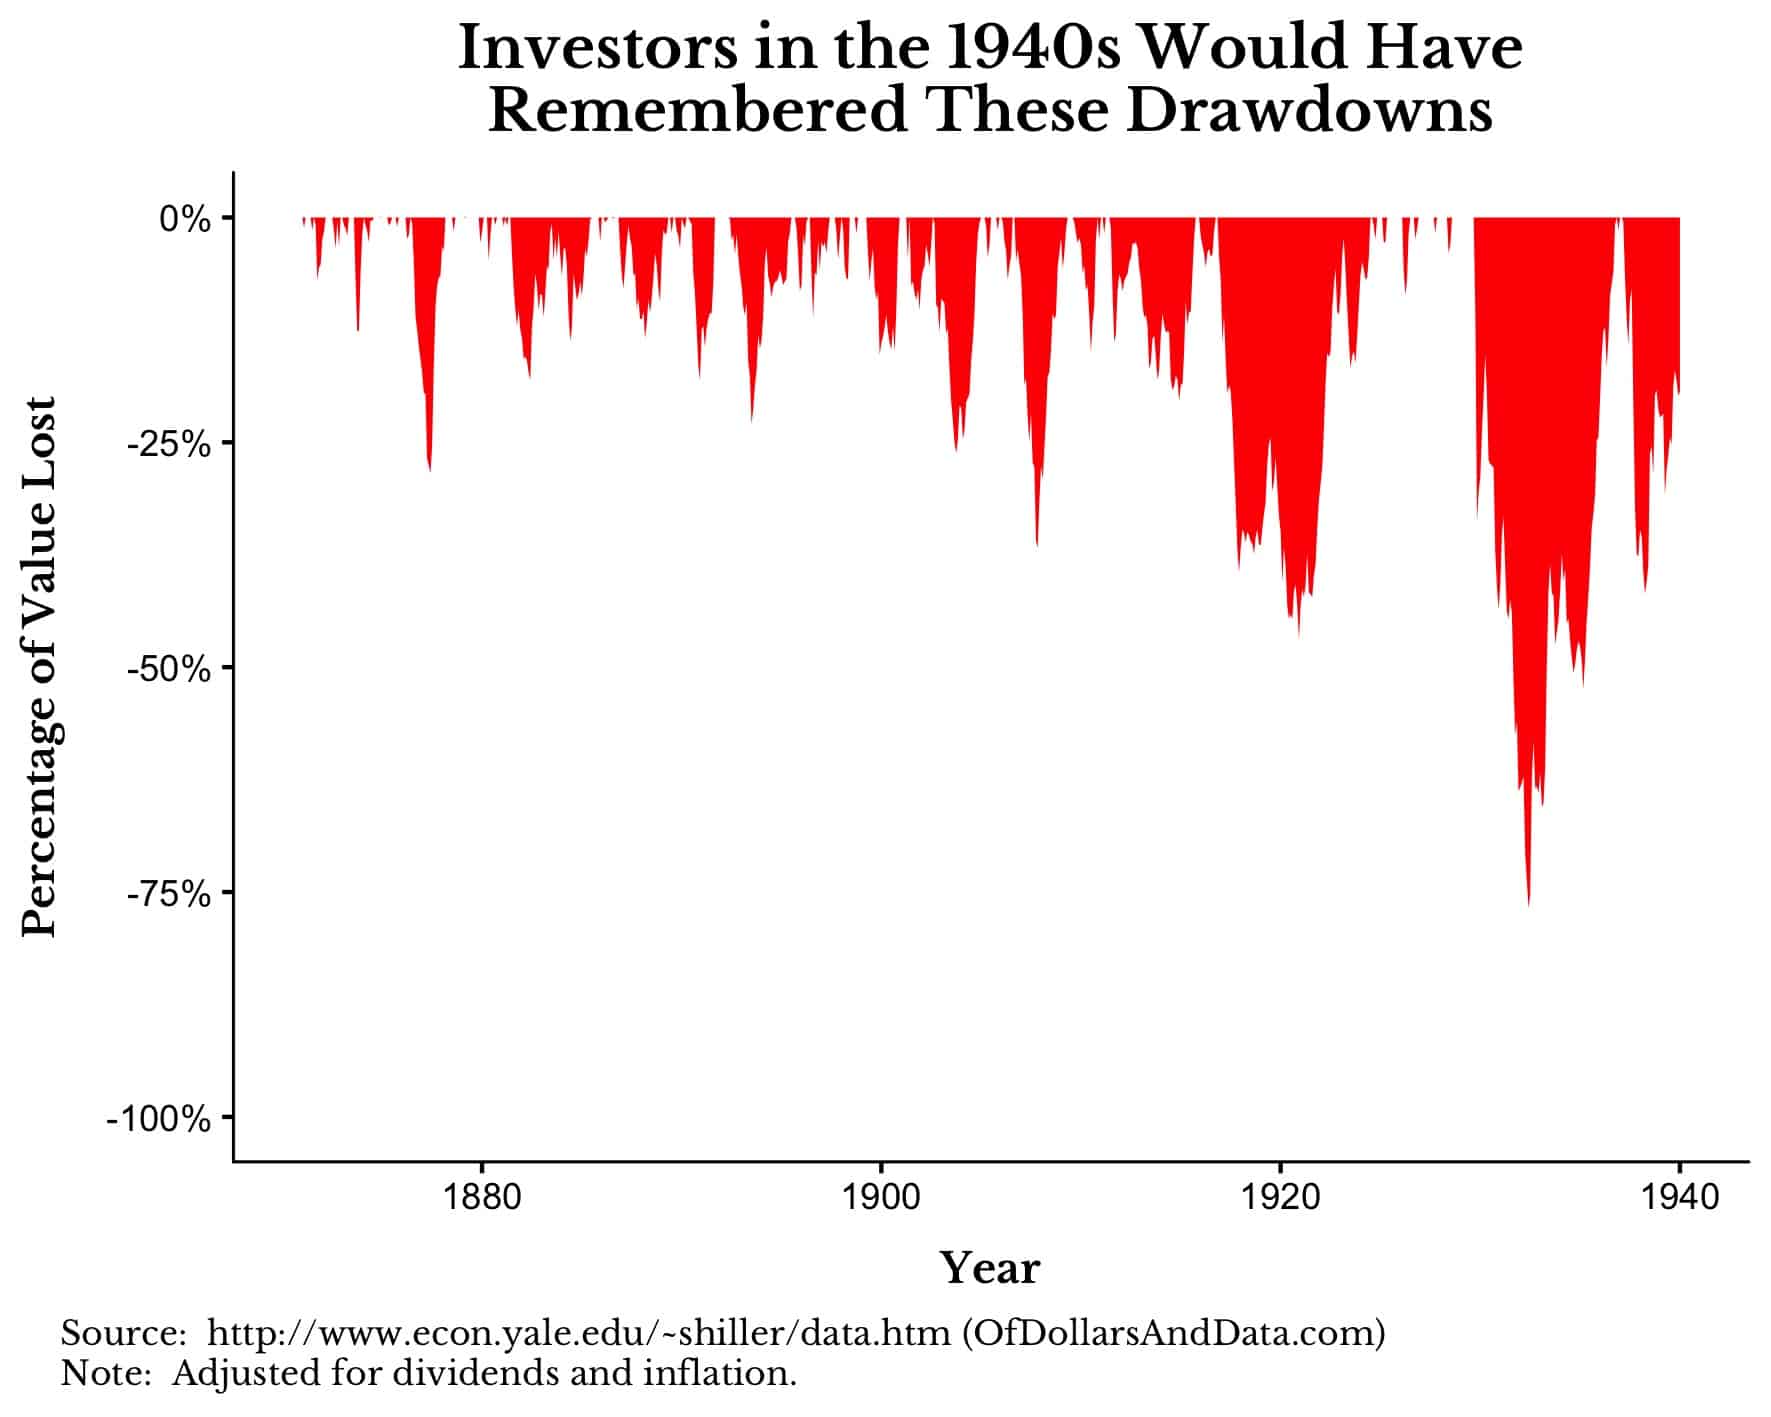 Chart showing drawdowns of US stocks from 1871 to 1940.